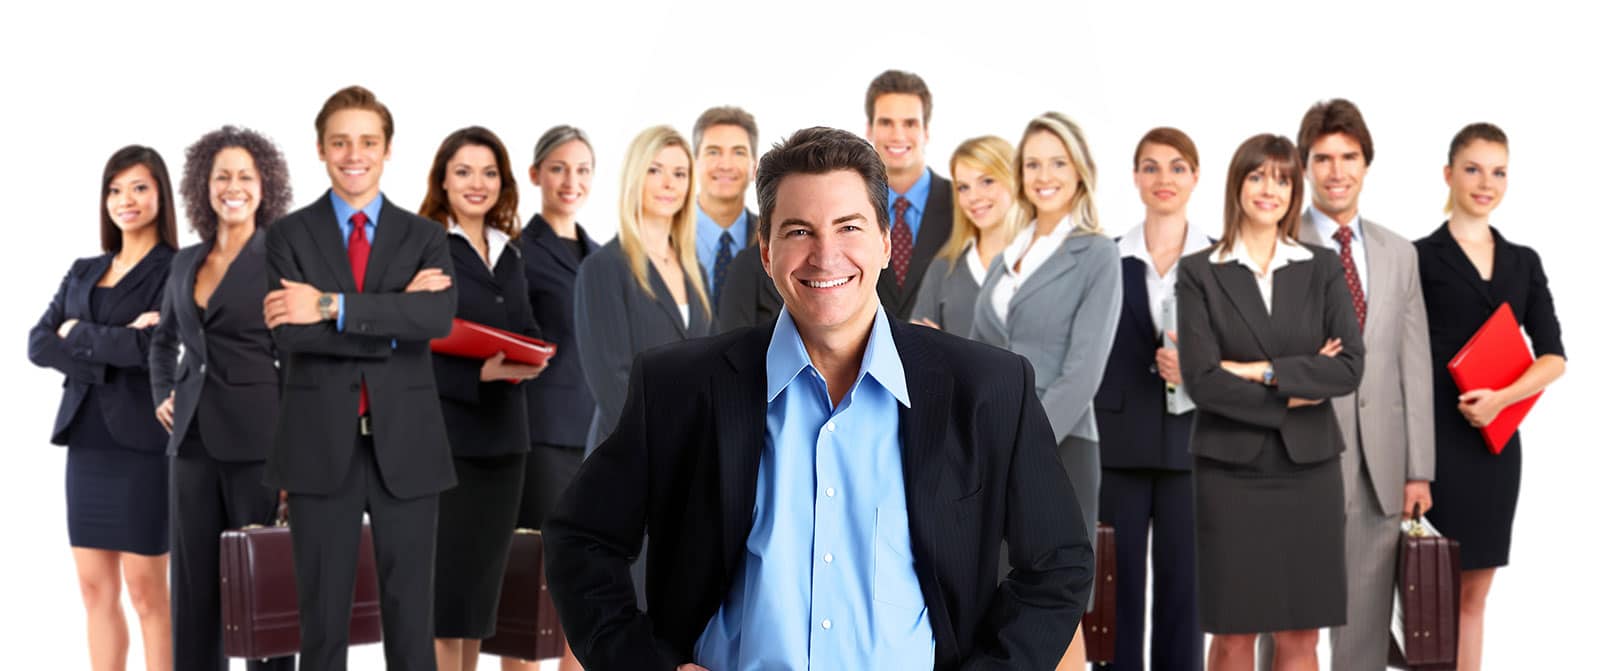 Image a group of people in office attire on PSA Financial's website